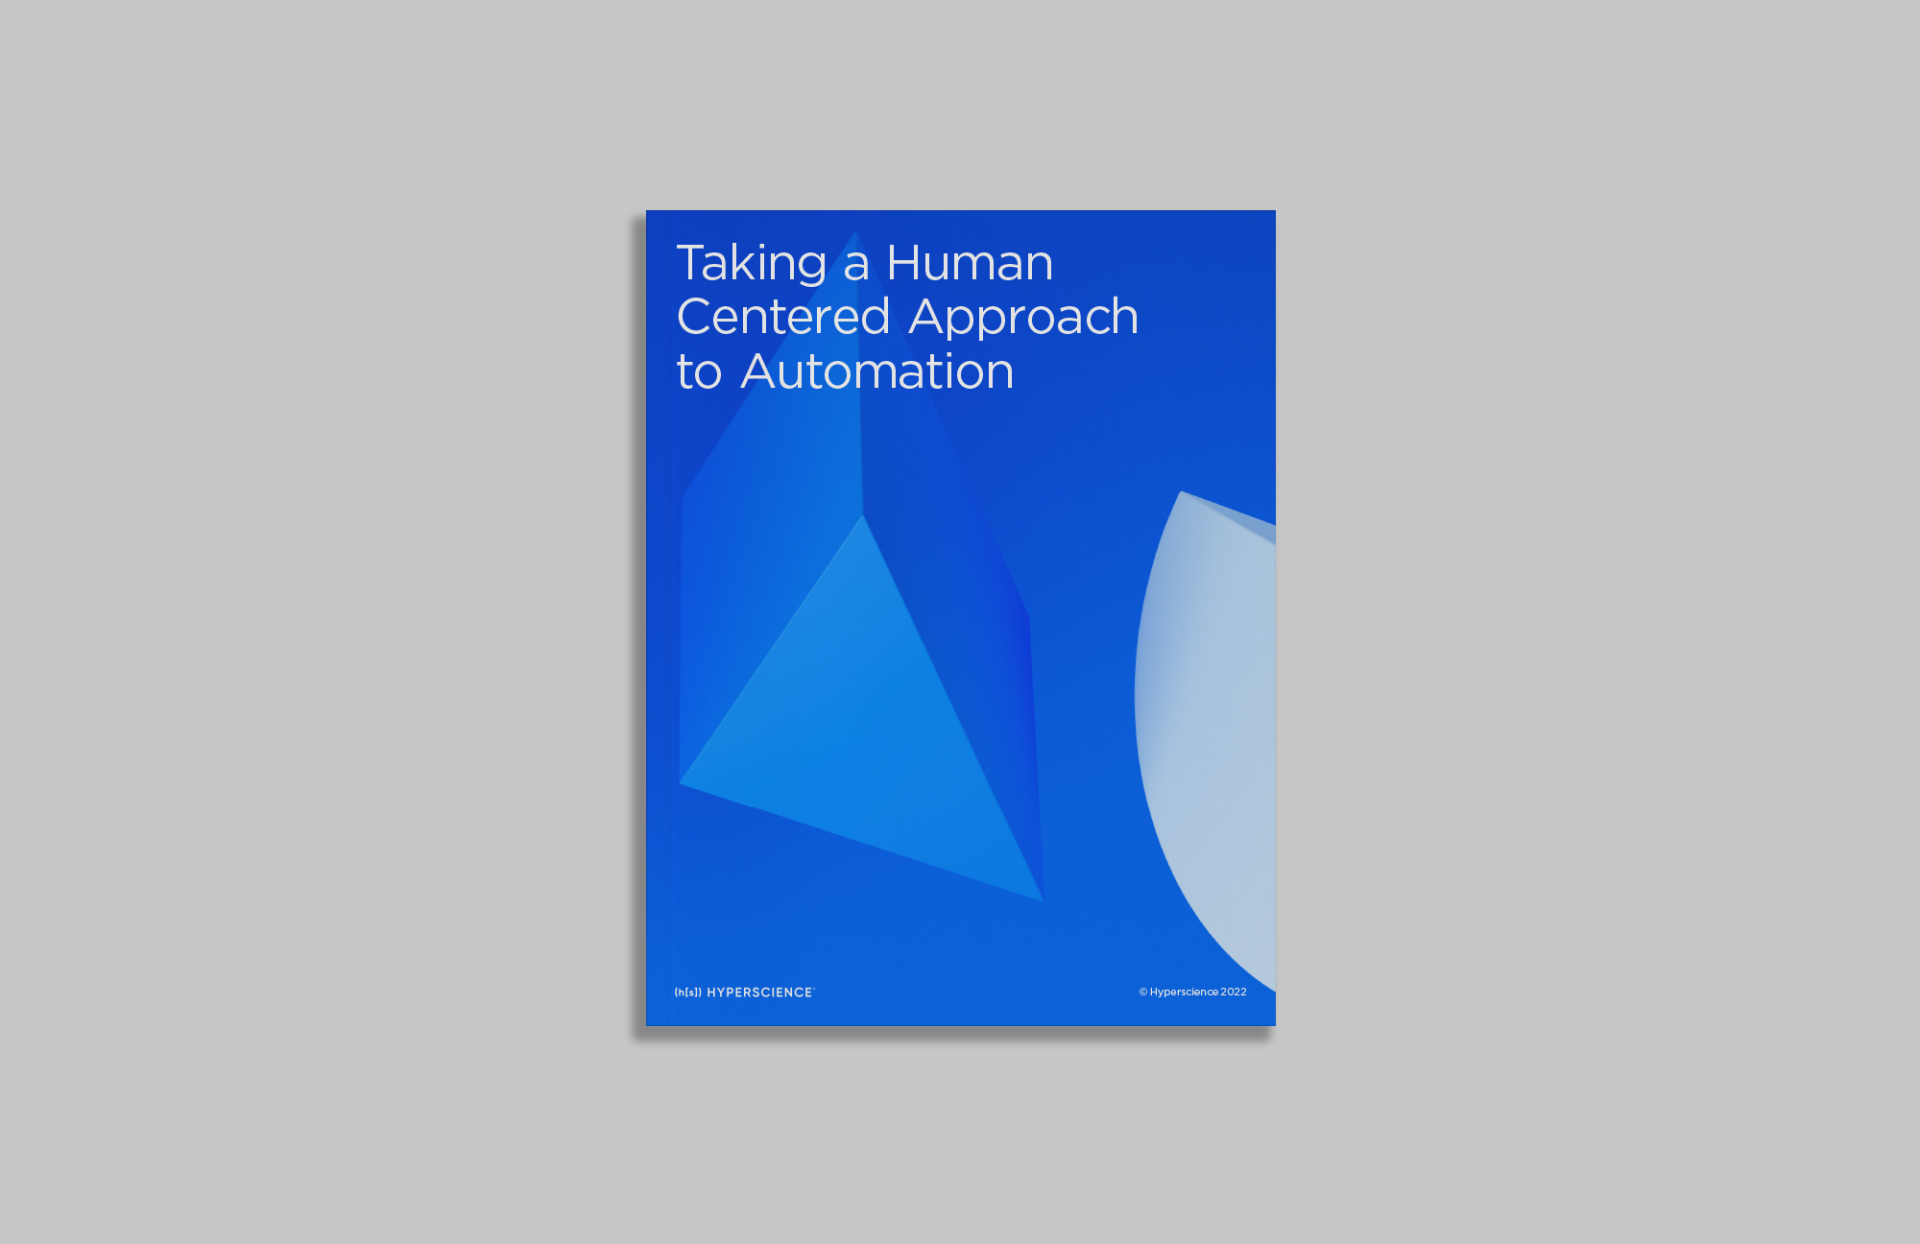 Taking a Human Centered Approach to Automation